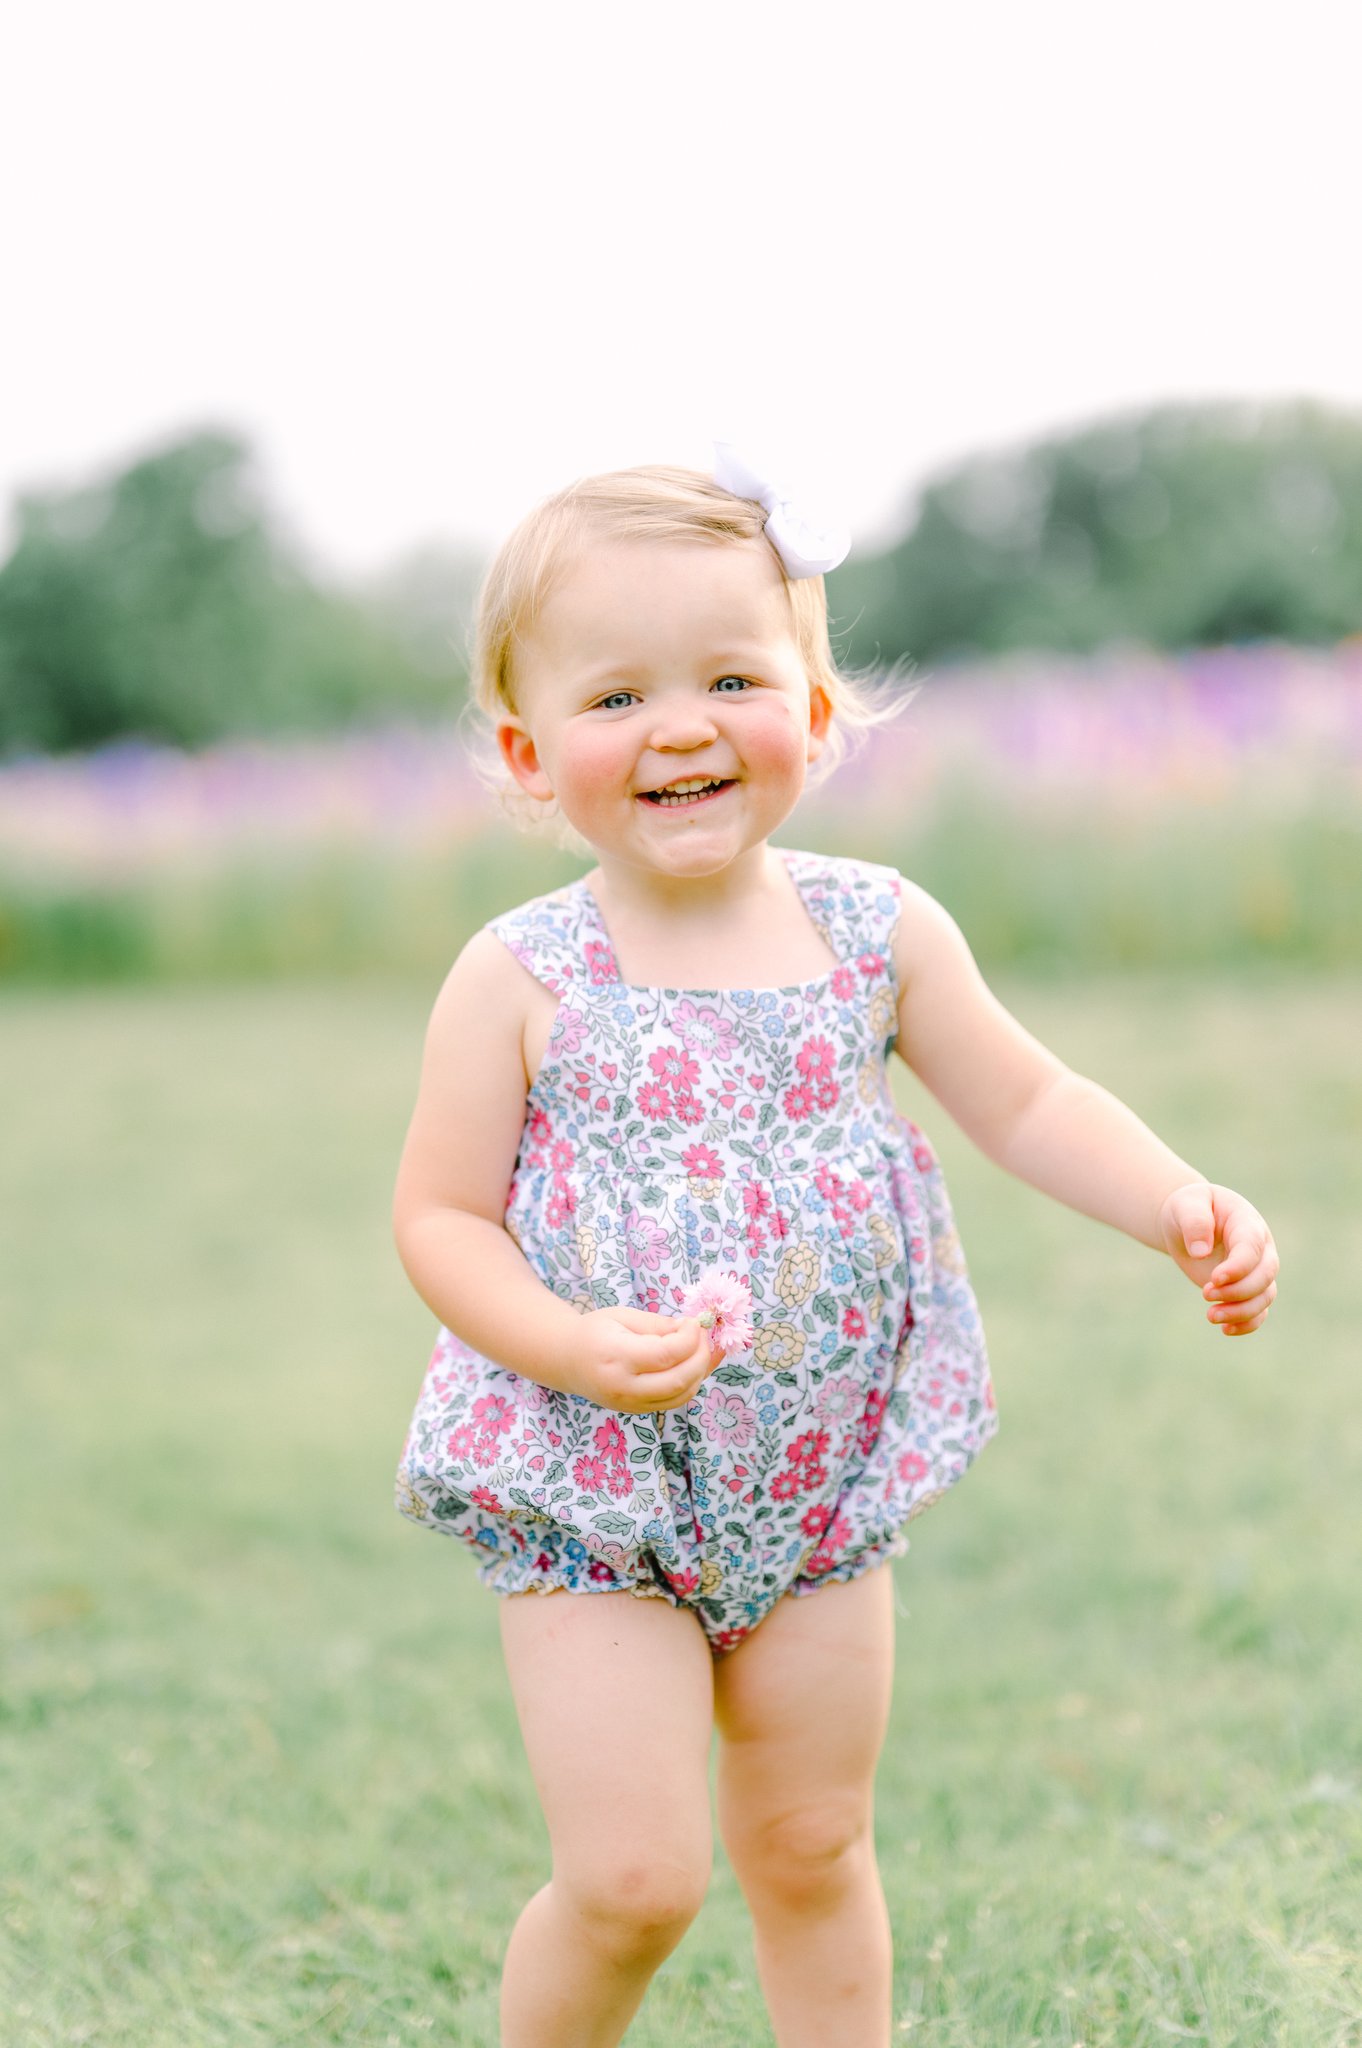 Toddler running in front of a flower field.